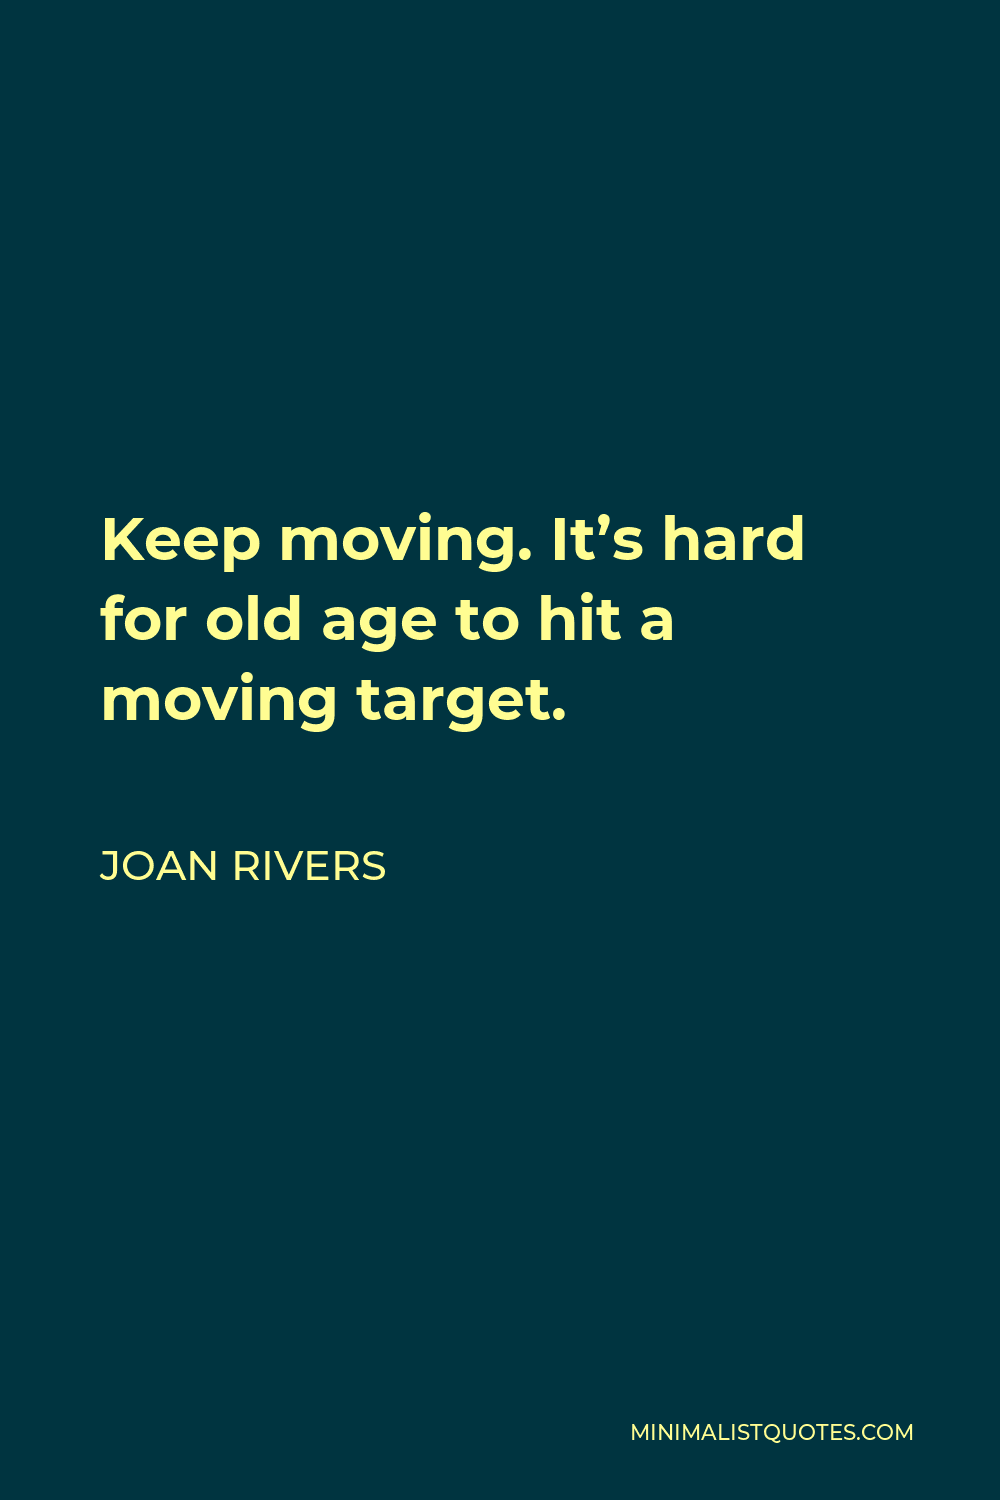 Joan Rivers Quote - Keep moving. It’s hard for old age to hit a moving target.